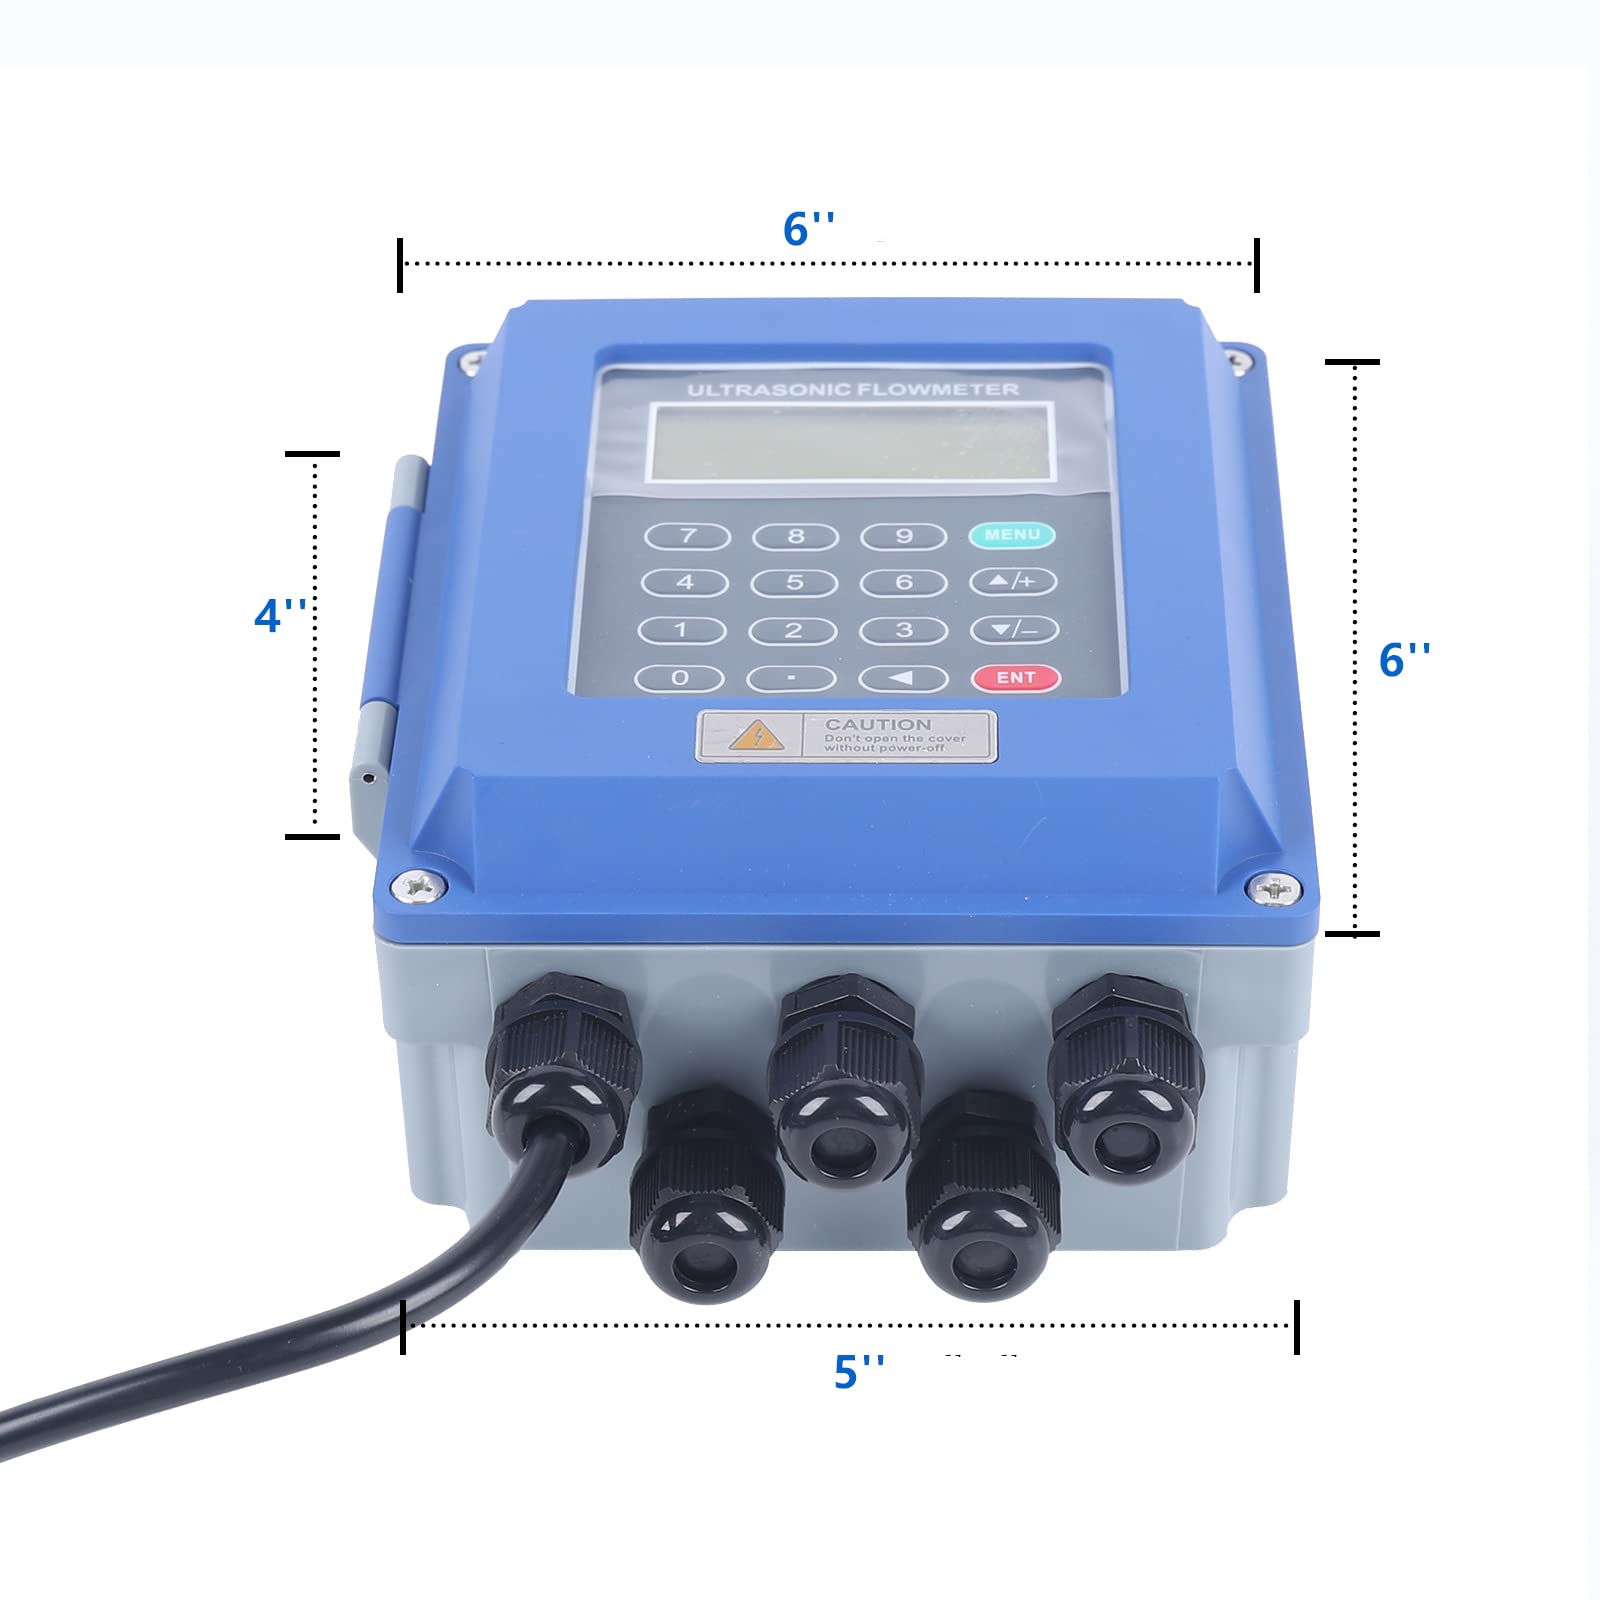 Ultrasonic Flow Meter TUF-2000B Liquid Water Flow Control Meter Flowmeter Counter LCD Display with TS-2 & TM-1 Clamp-on Transducers DN20-700mm